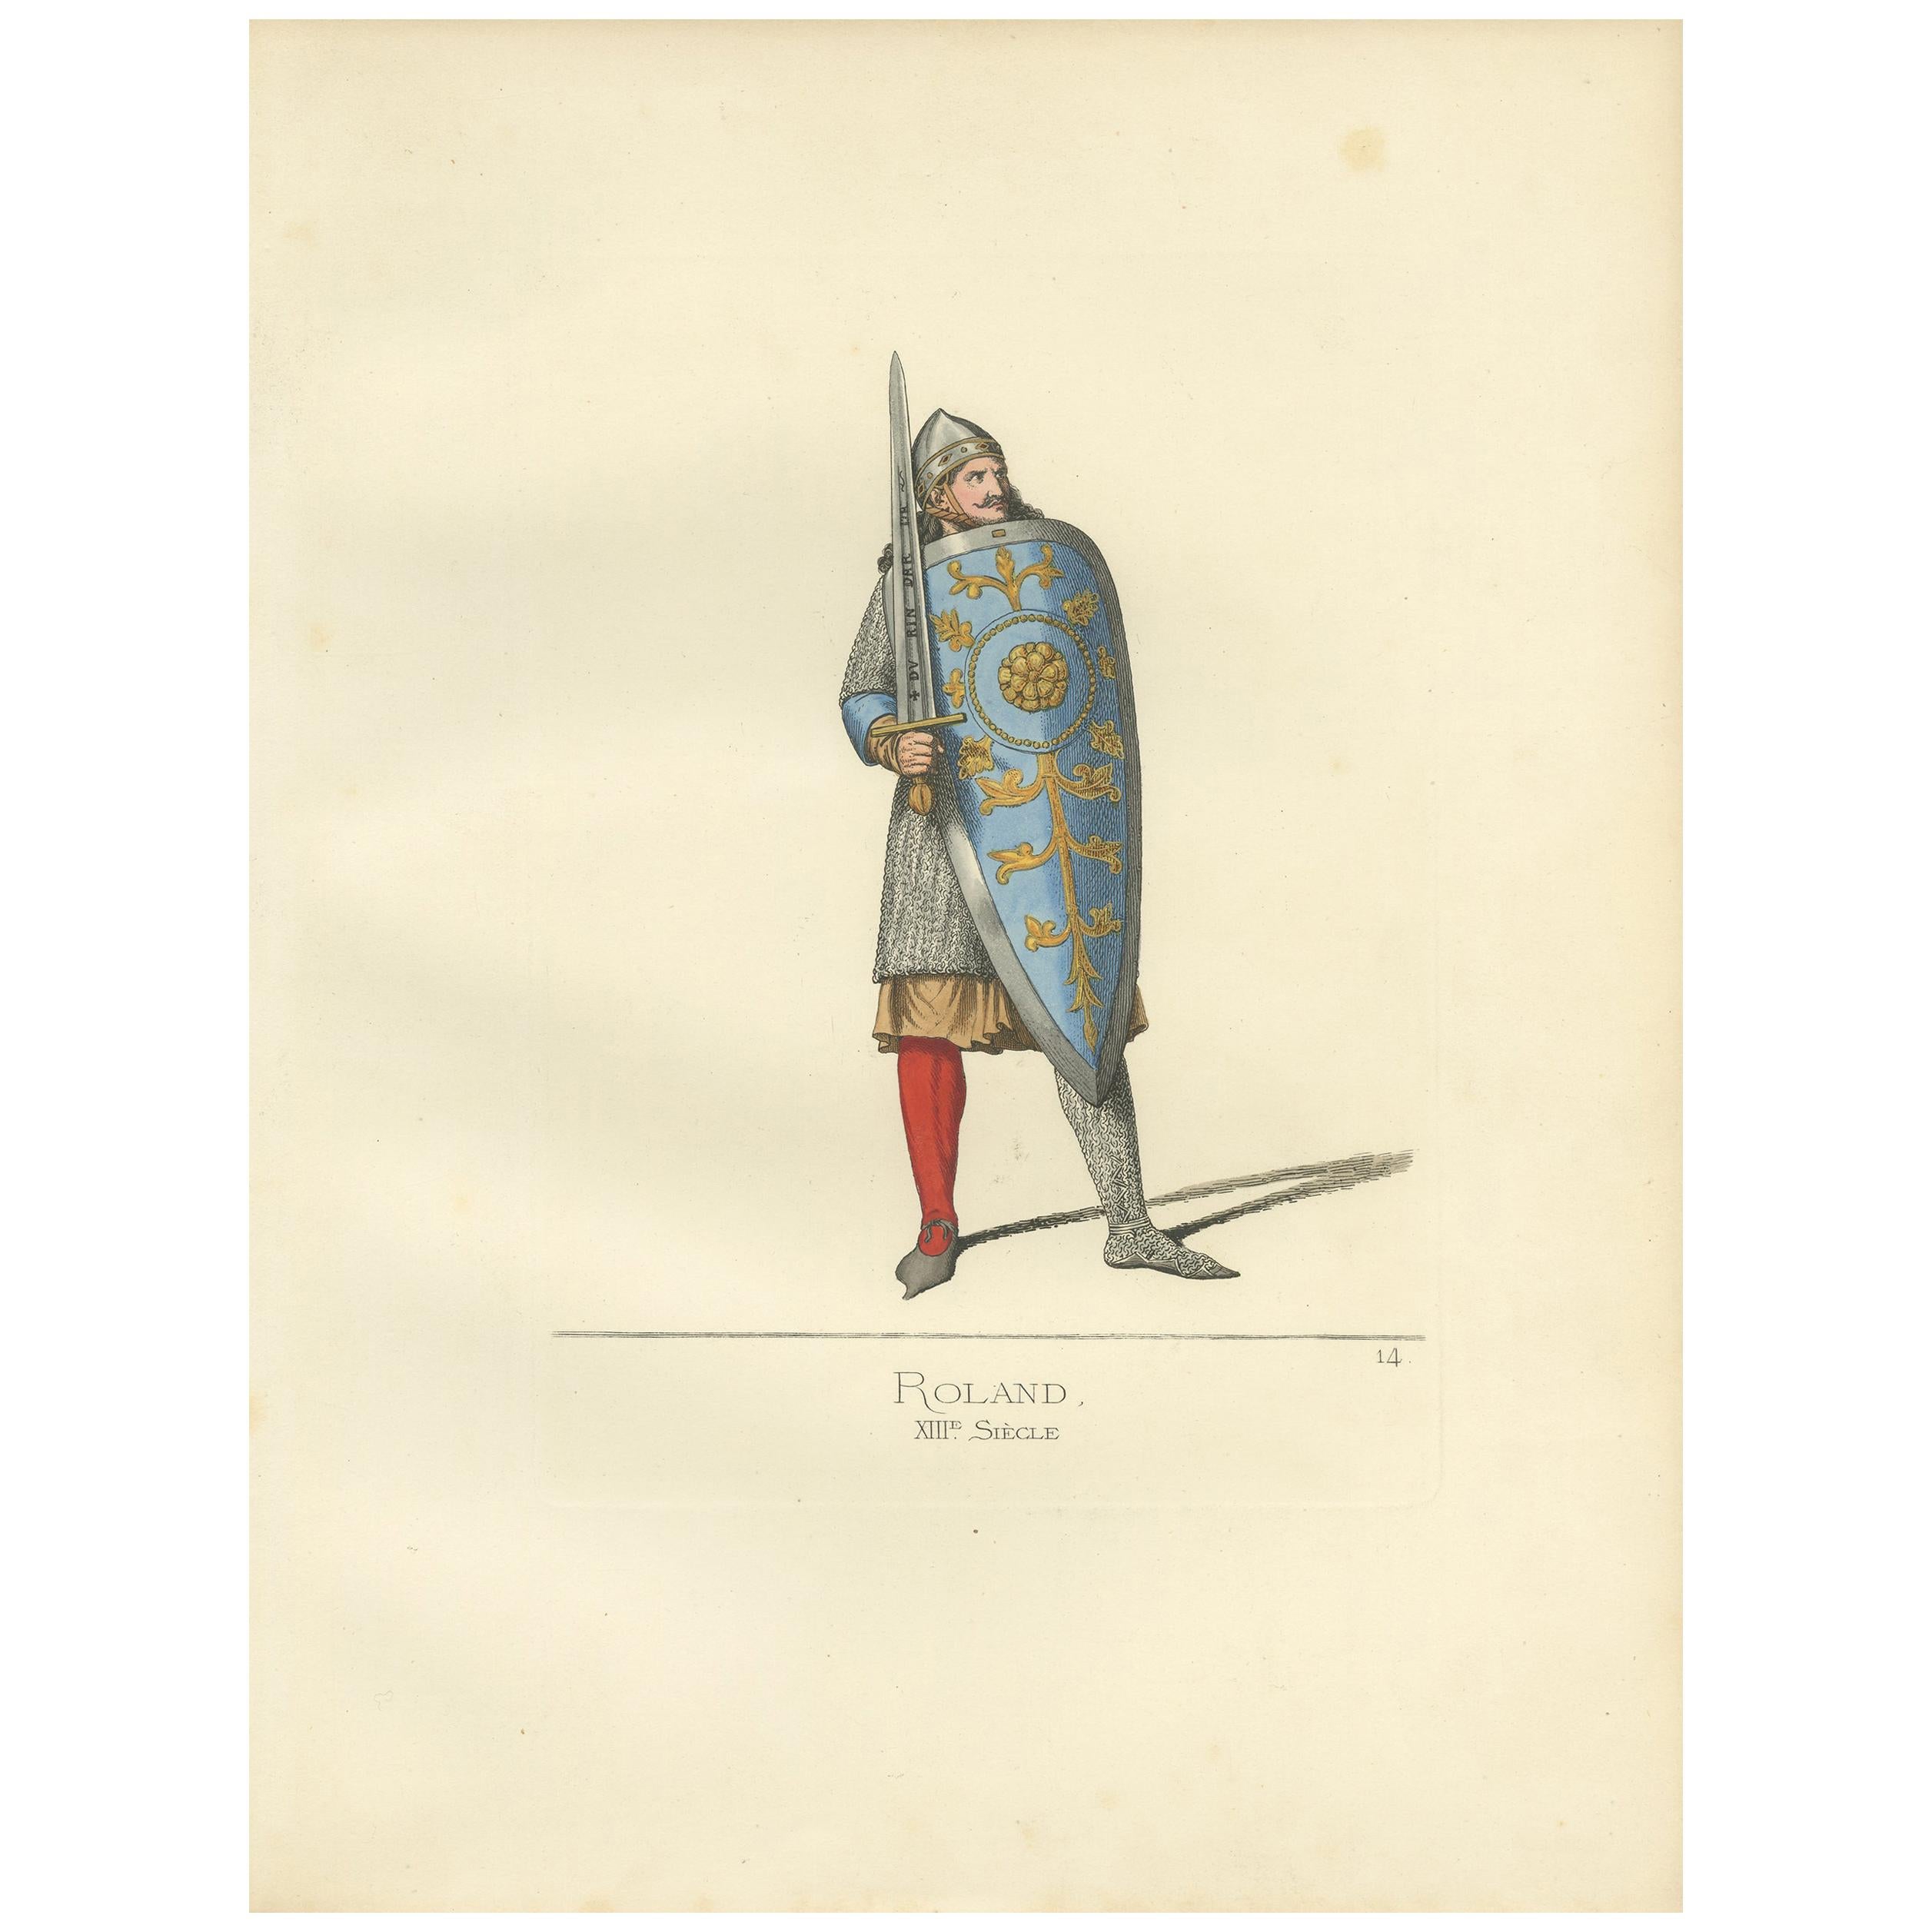 Antique Print of Roland, a Frankish Military Leader, by Bonnard, 1860